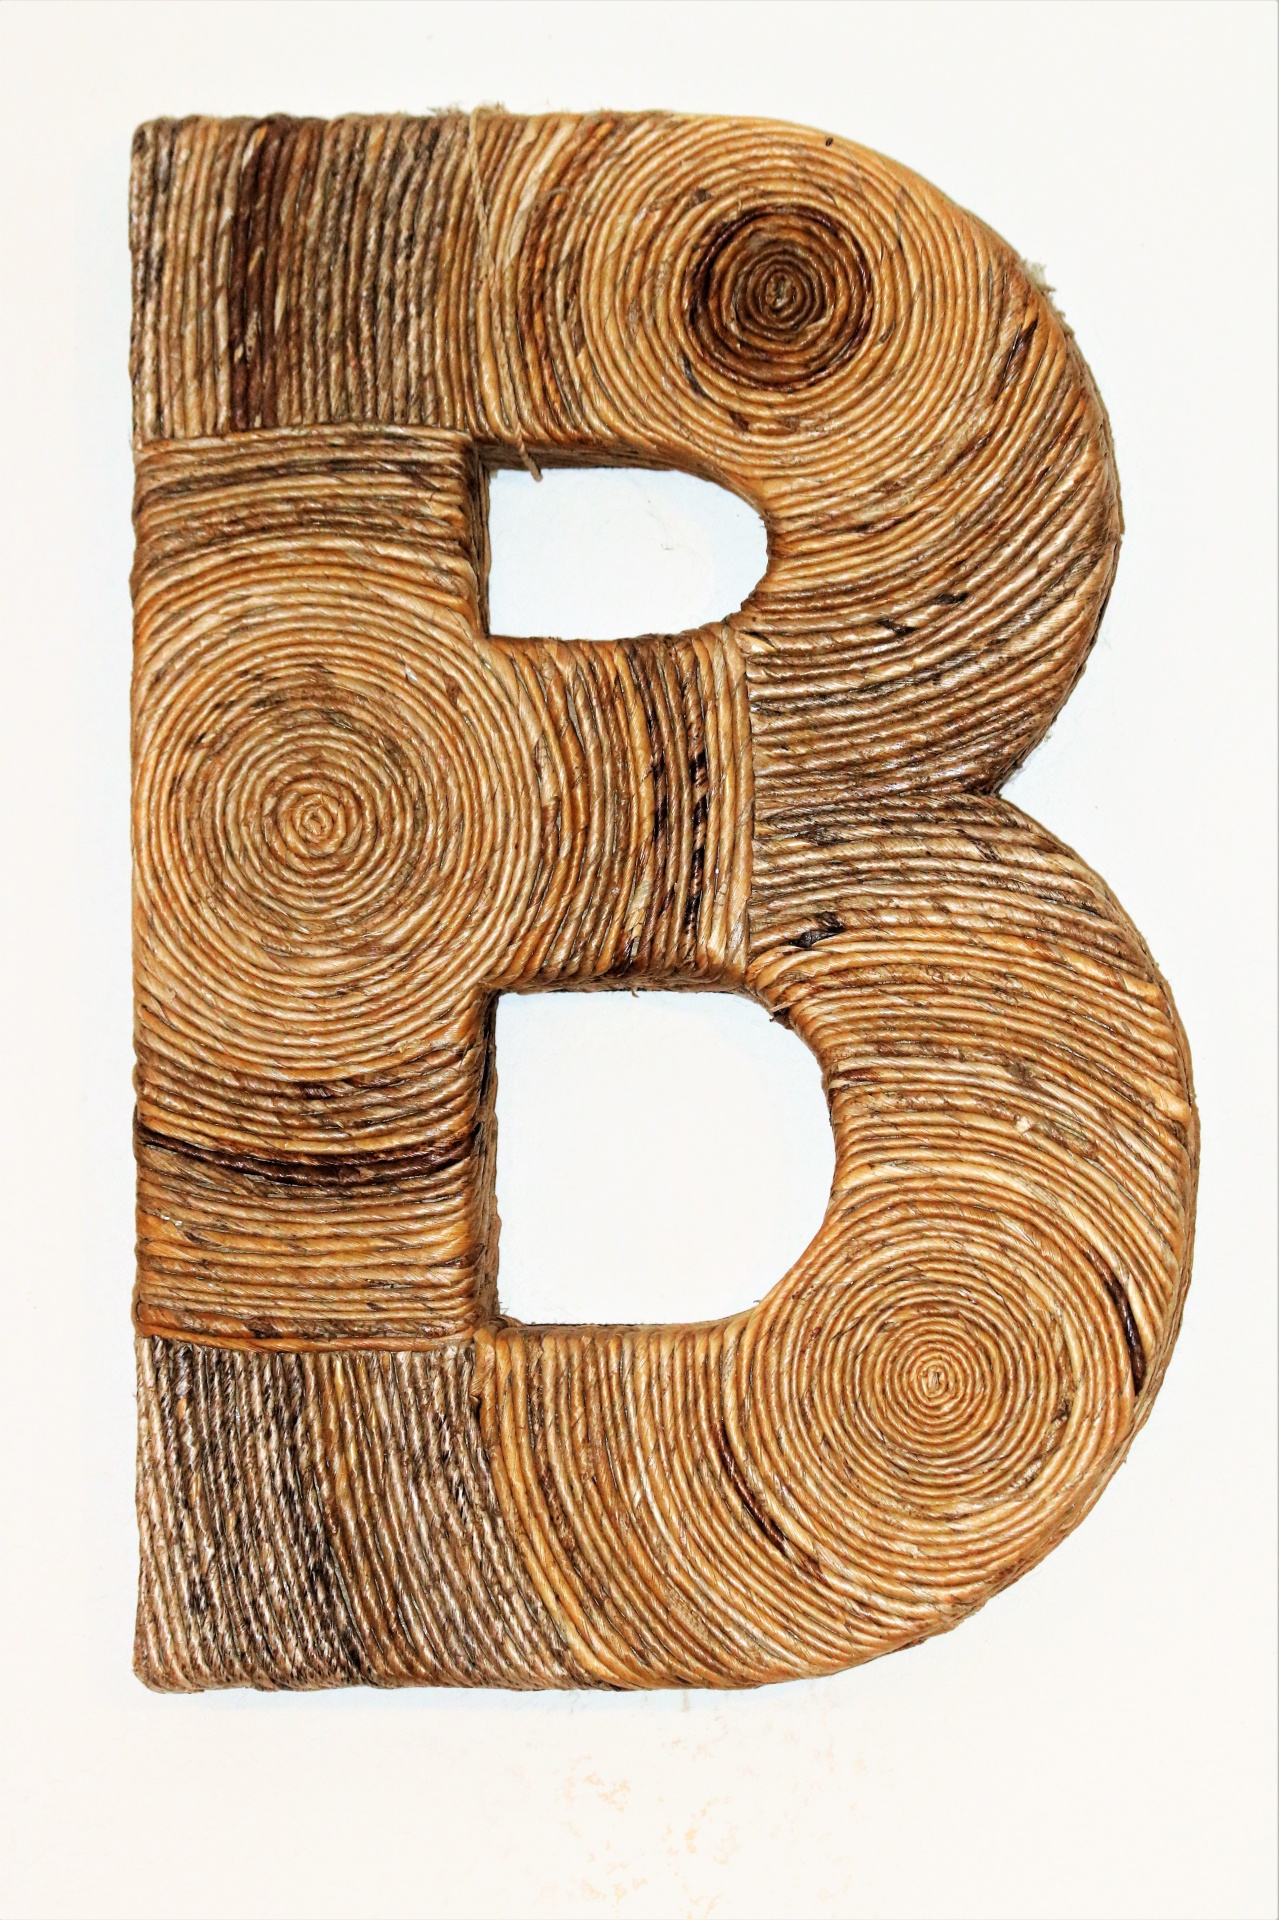 alphabet-letter-b-made-of-twine-free-stock-photo-public-domain-pictures